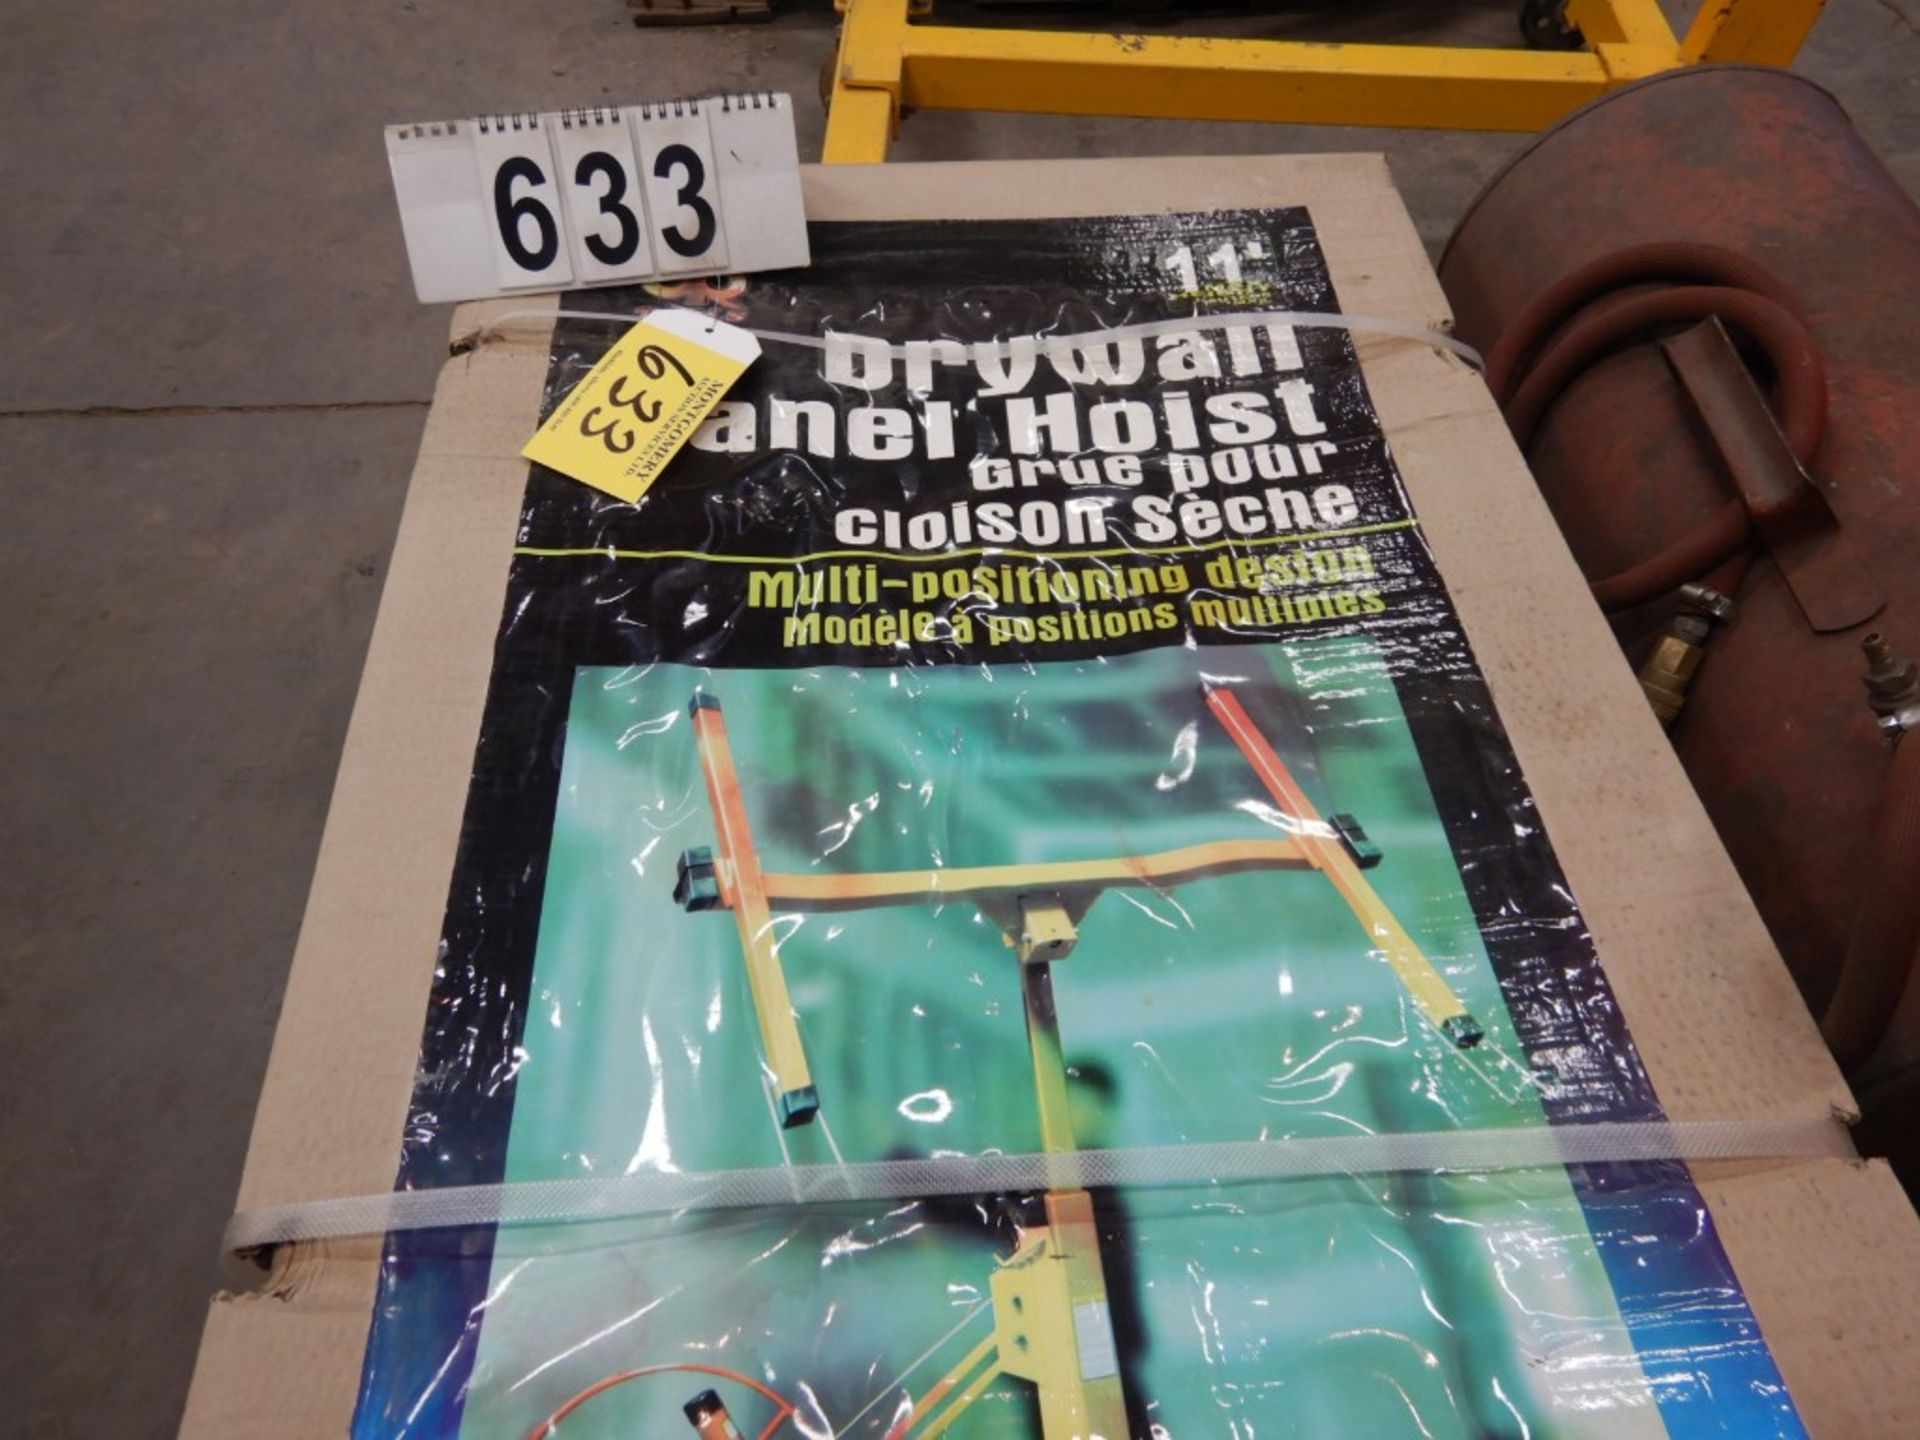 DRYWALL PANEL HOIST, MULTI POSITIONING DESIGN (NEW IN BOX), 11 FT MAX HEIGHT